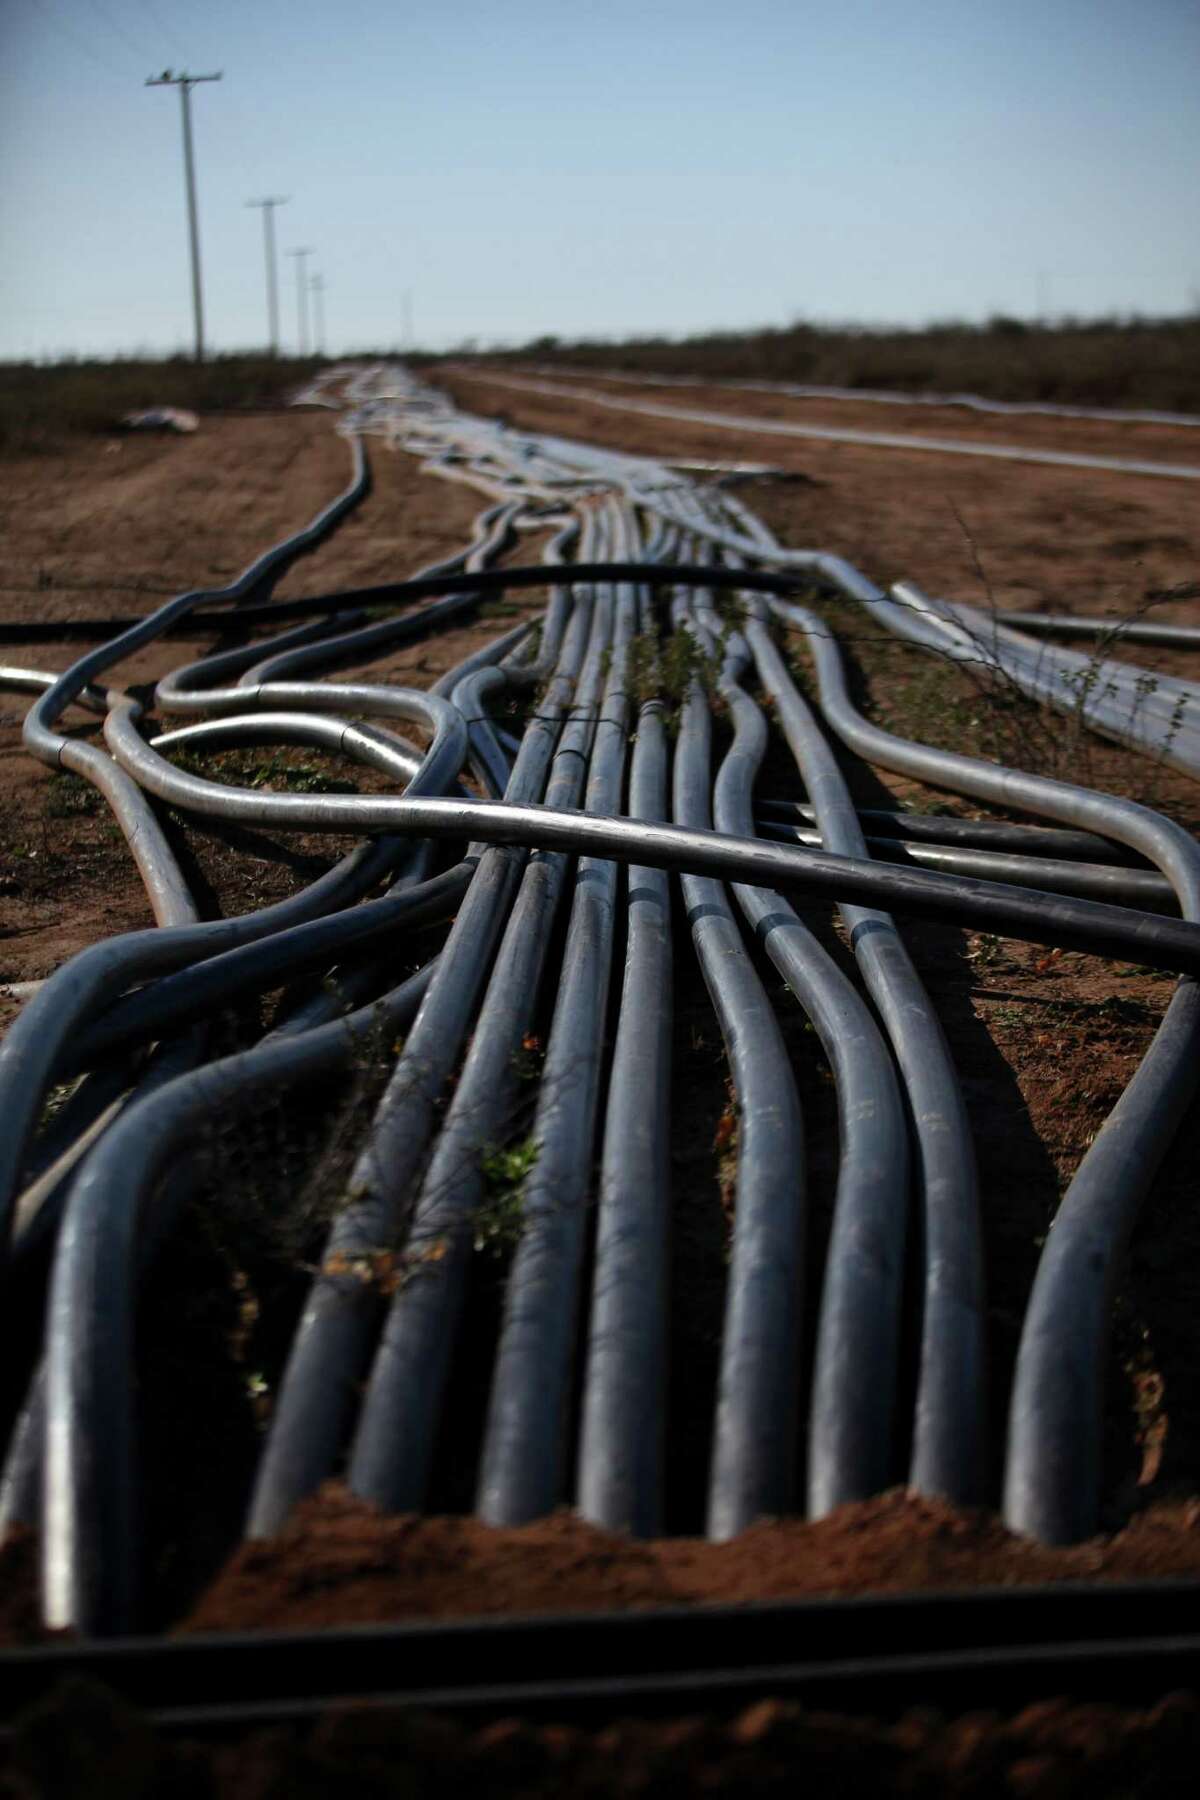 Oil from wells flows through pipelines to a storage facility on the Giddings Estate, near Midland. New lines out of the Permian have added more than 750,000 barrels a day of capacity, while output grew by only 400,000. With an outlet to Gulf Coast refineries, the Permian has been the only major U.S. shale region to keep growing as prices dropped by more than half to less than $50.